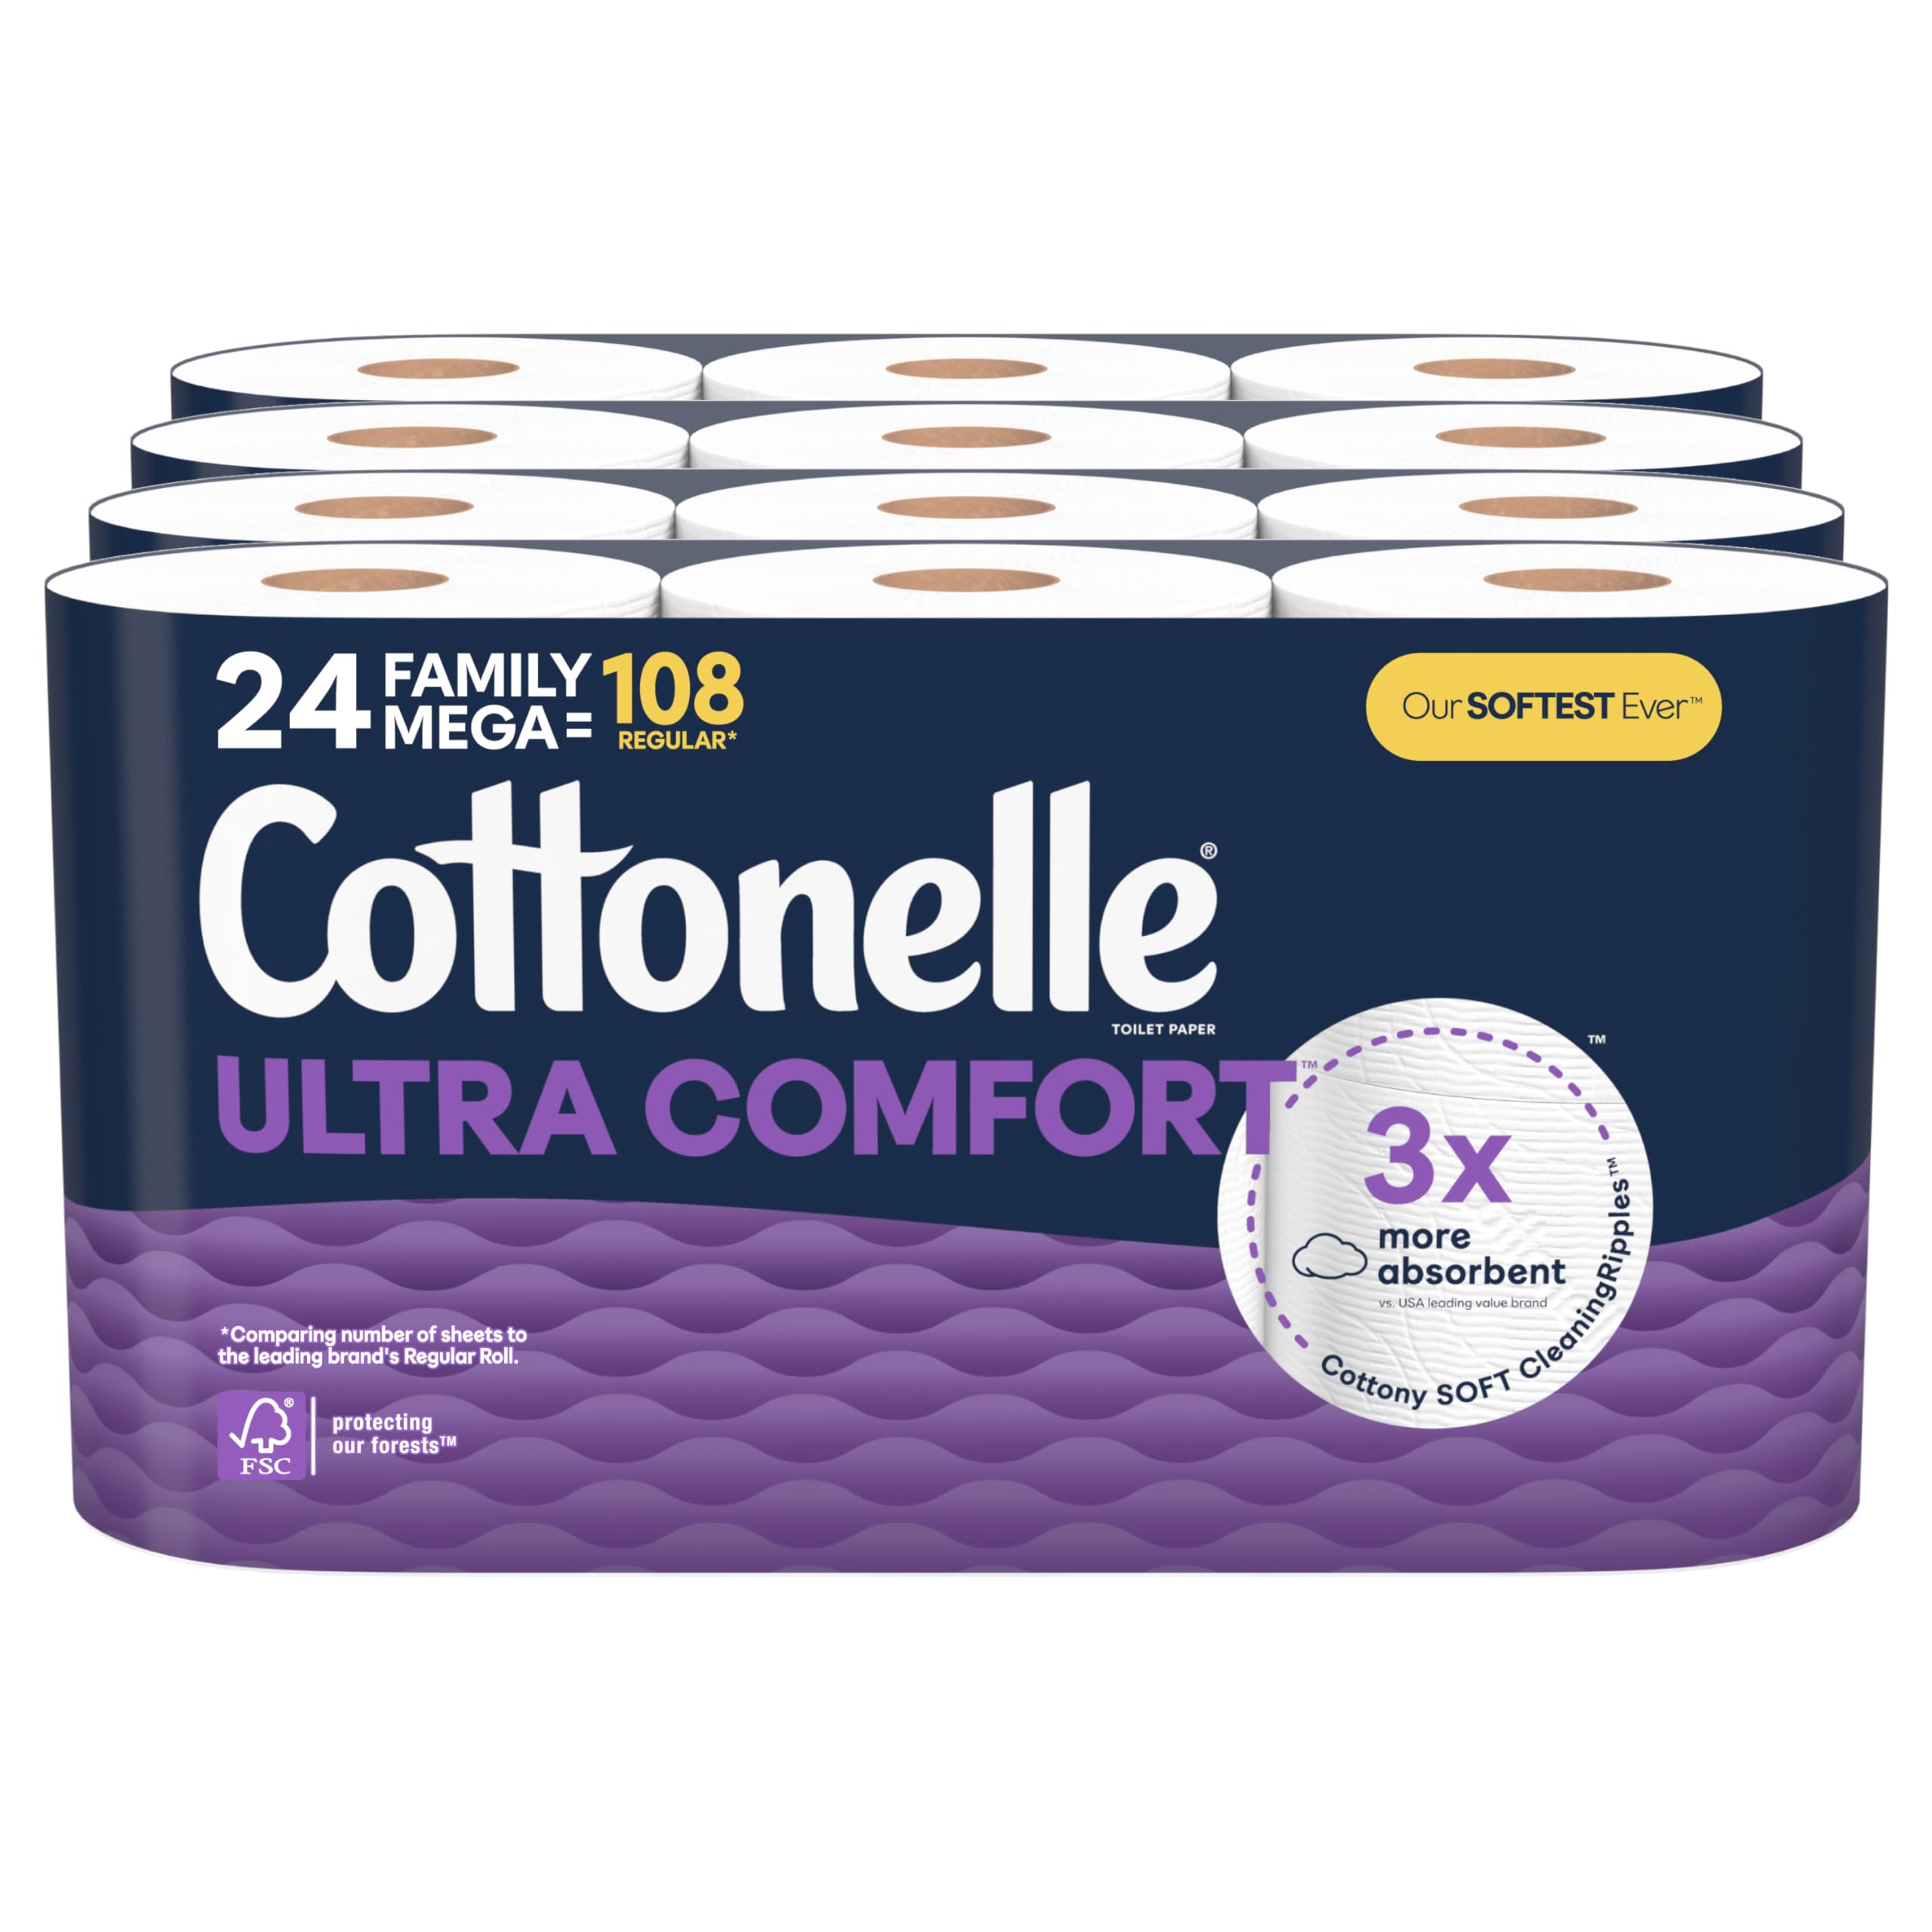 Cottonelle Ultra Comfort Toilet Paper with Cushiony CleaningRipples Texture, 24 Family Mega Rolls (24 Family Mega Rolls = 108 Regular Rolls) (4 Packs of 6), 296 Sheets per Roll, Packaging May Vary